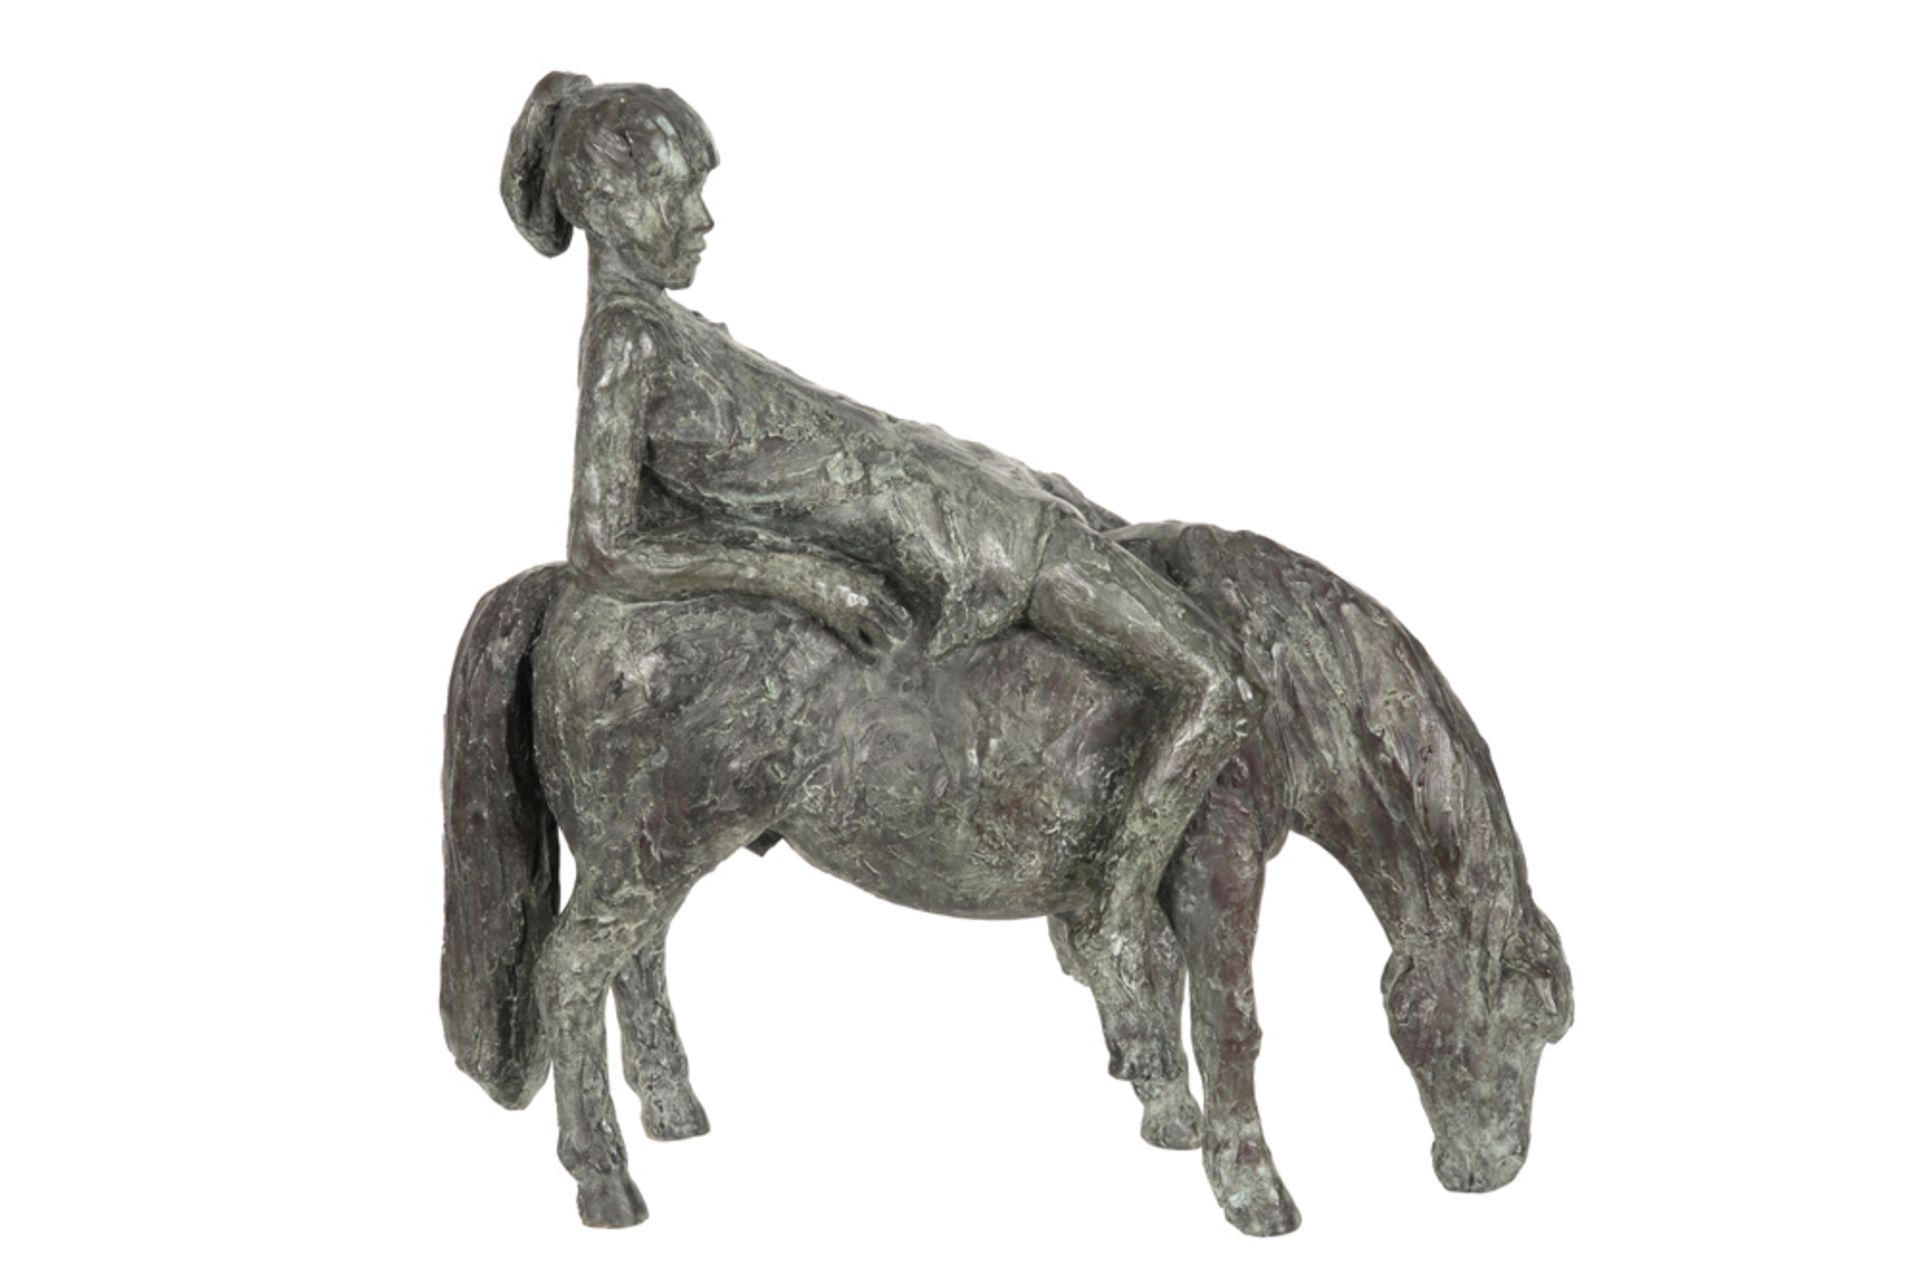 20th cent. Belgian sculpture in bronze - signed Jul Vuylsteke and with Belgian foundry mark ||